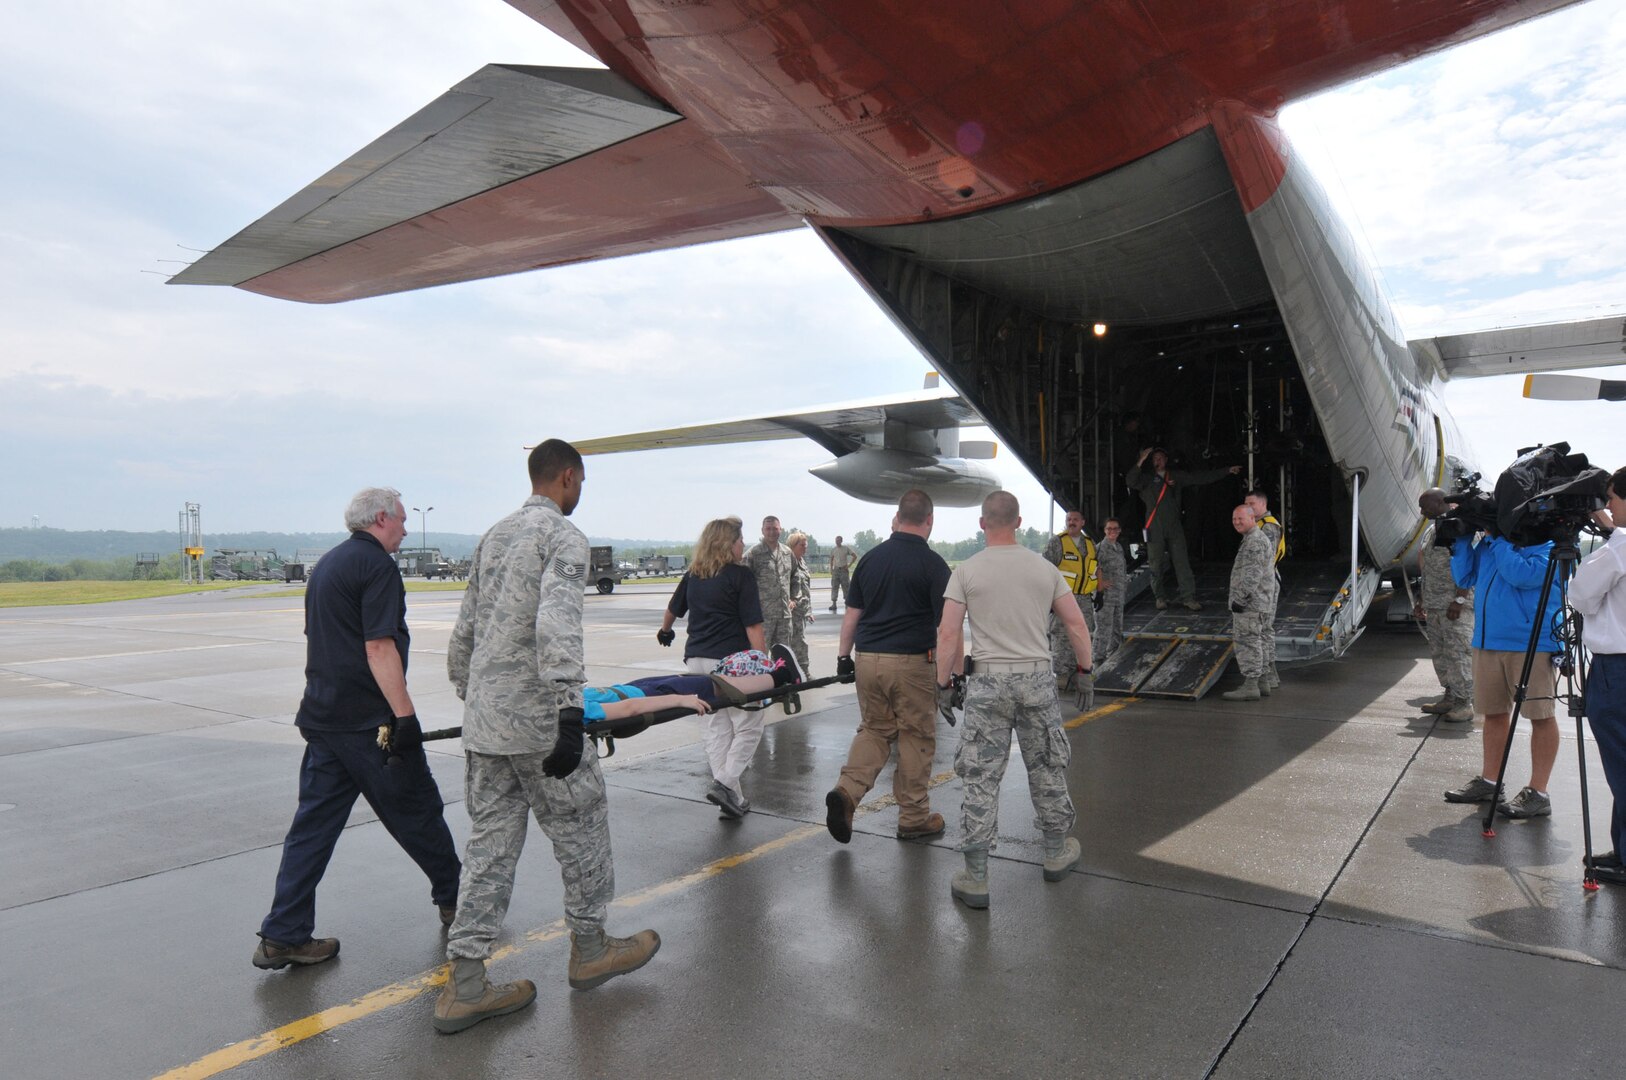 Members of the 139th Aeromedical Evacuation Squadron of the New York Air National Guard's 109th Airlift Wing, the 118th Medical Group Tennessee Air National guard and the Albany New York Veterans Administration members carry patients made up from the New York Civil Air Patrol from the staging area tent to a LC-130 Hercules aircraft during an exercise at Stratton Air National Guard Base, Scotia New York. 